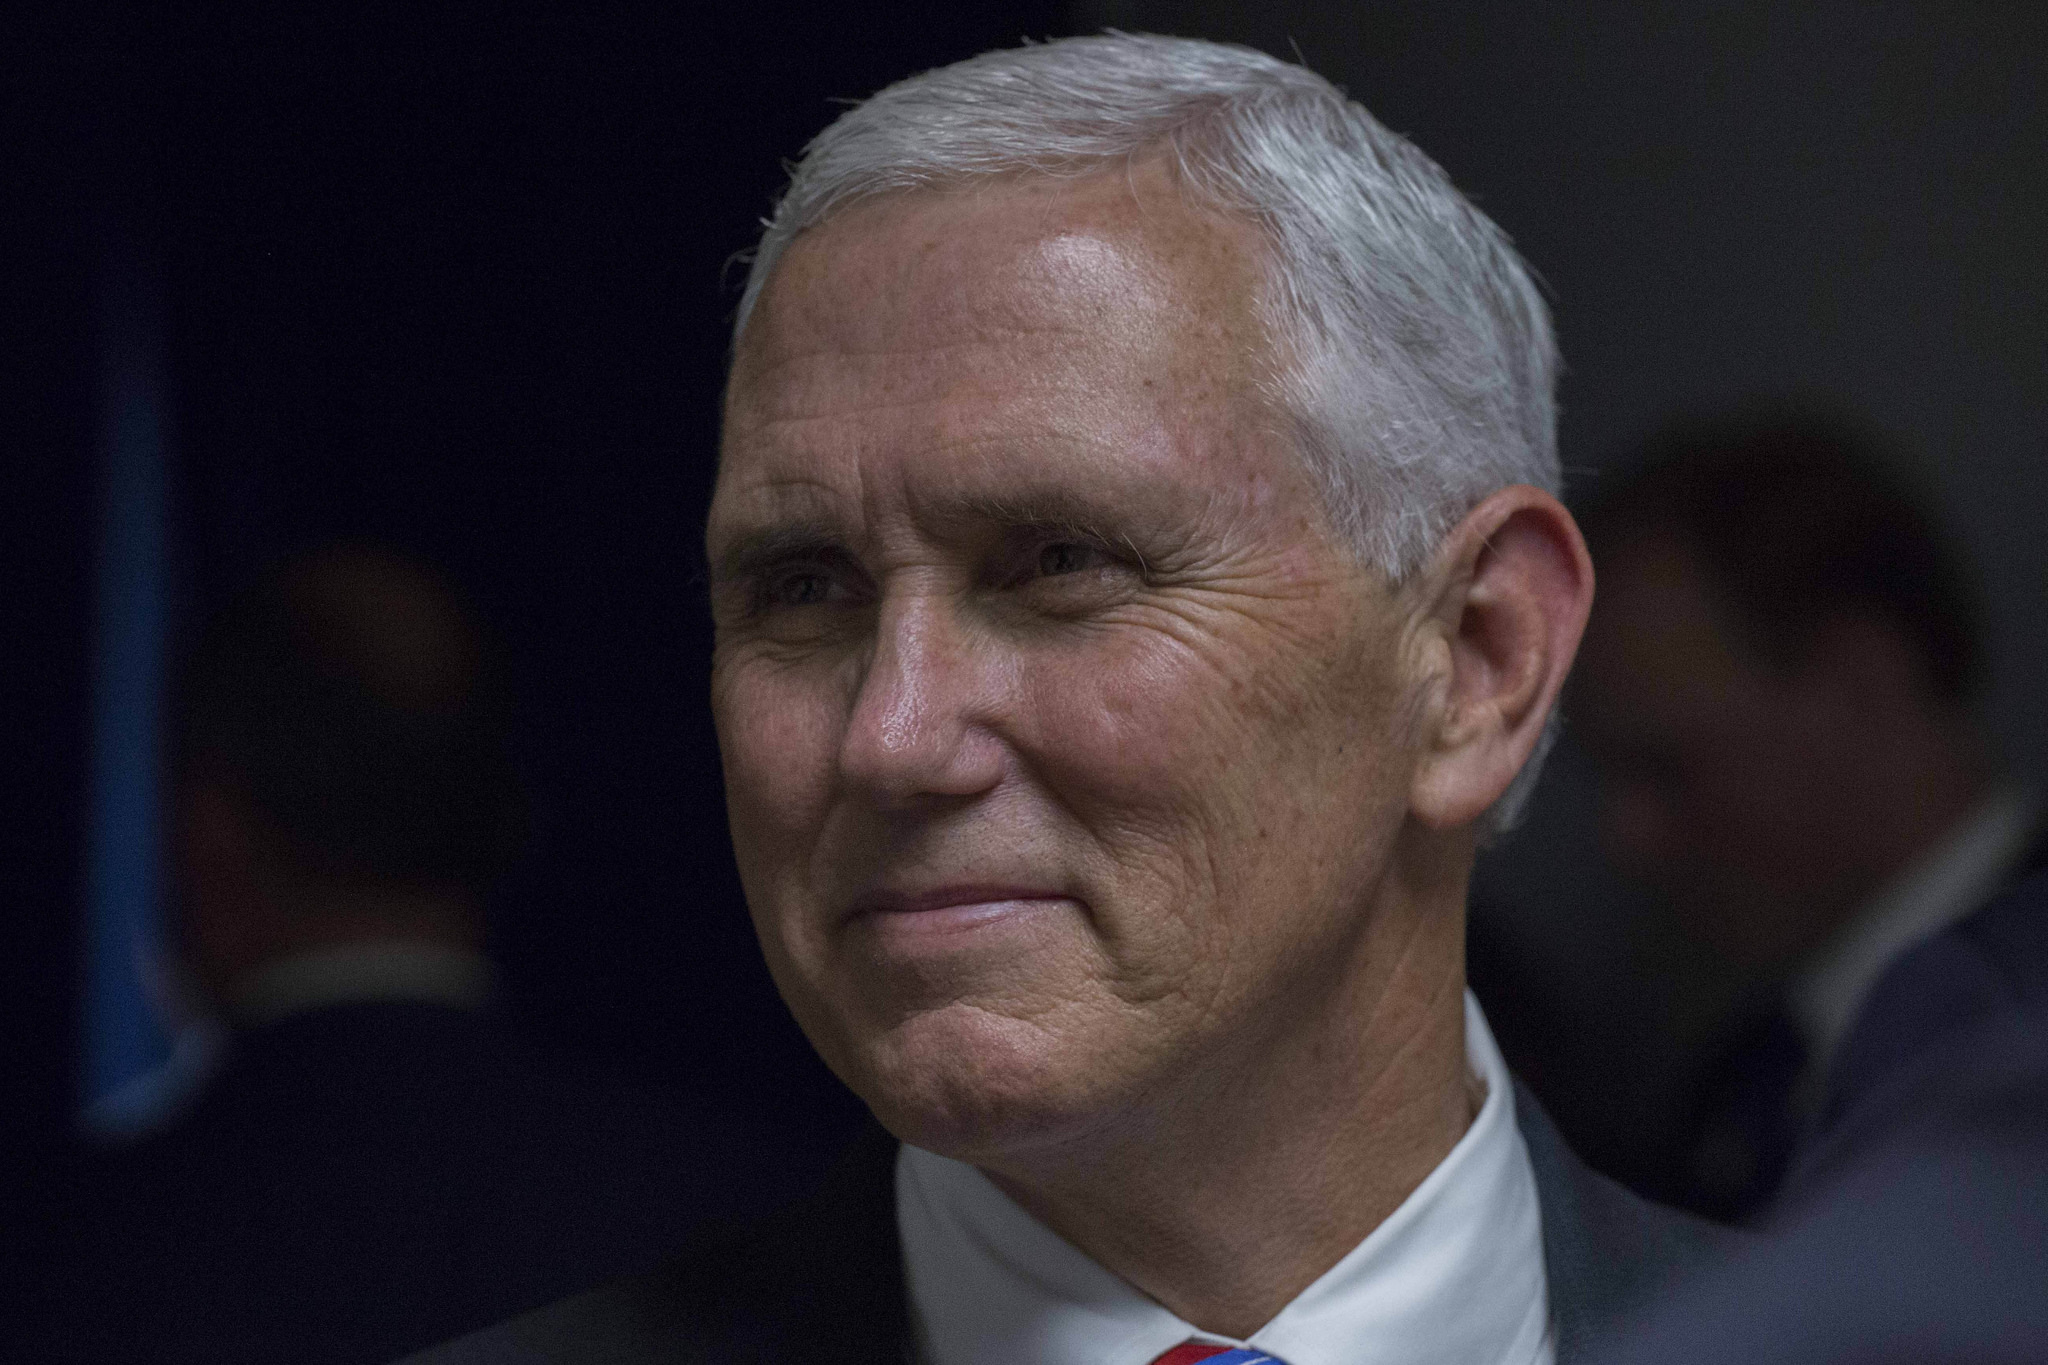 Vice President Mike Pence backstage at the Unleashing American Energy Event at Energy Department Headquarters in Washington D.C. June 29, 2017 Photo Simon Edelman, Energy Department